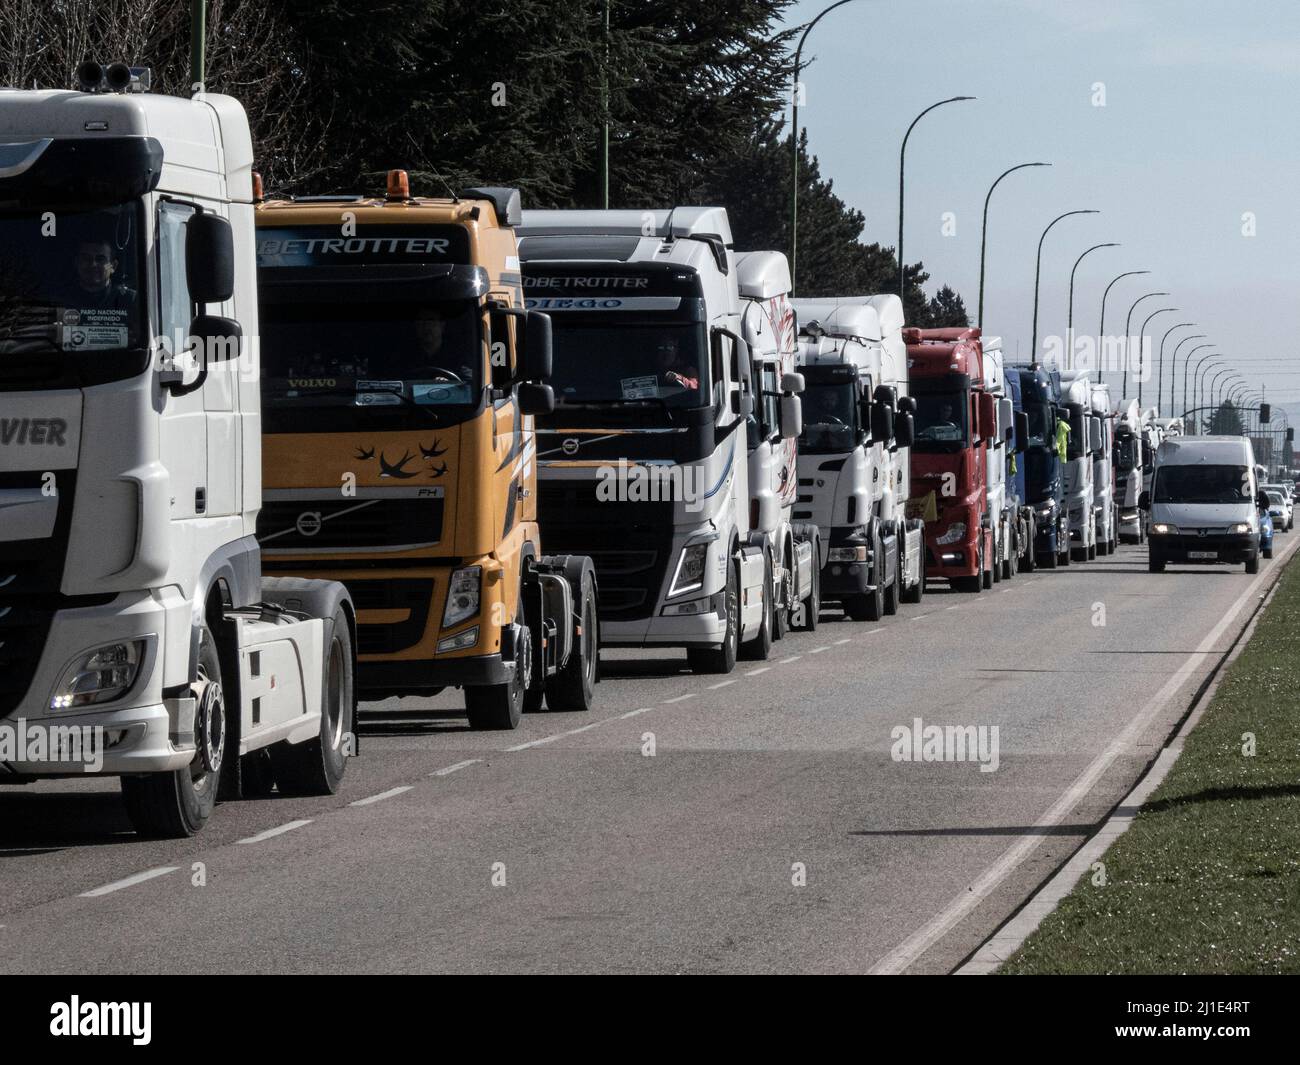 Burgos, Spain. 24th Mar, 2022. A line of trucks seen on Madrid-Irun Highway during the protest. Truckers join the transport strike as they pass through the city of Burgos. The strike is due to the rise in fuel prices and their working conditions, they have been paralyzing the country for a week. (Photo by Jorge Contreras Soto/SOPA Images/Sipa USA) Credit: Sipa USA/Alamy Live News Stock Photo